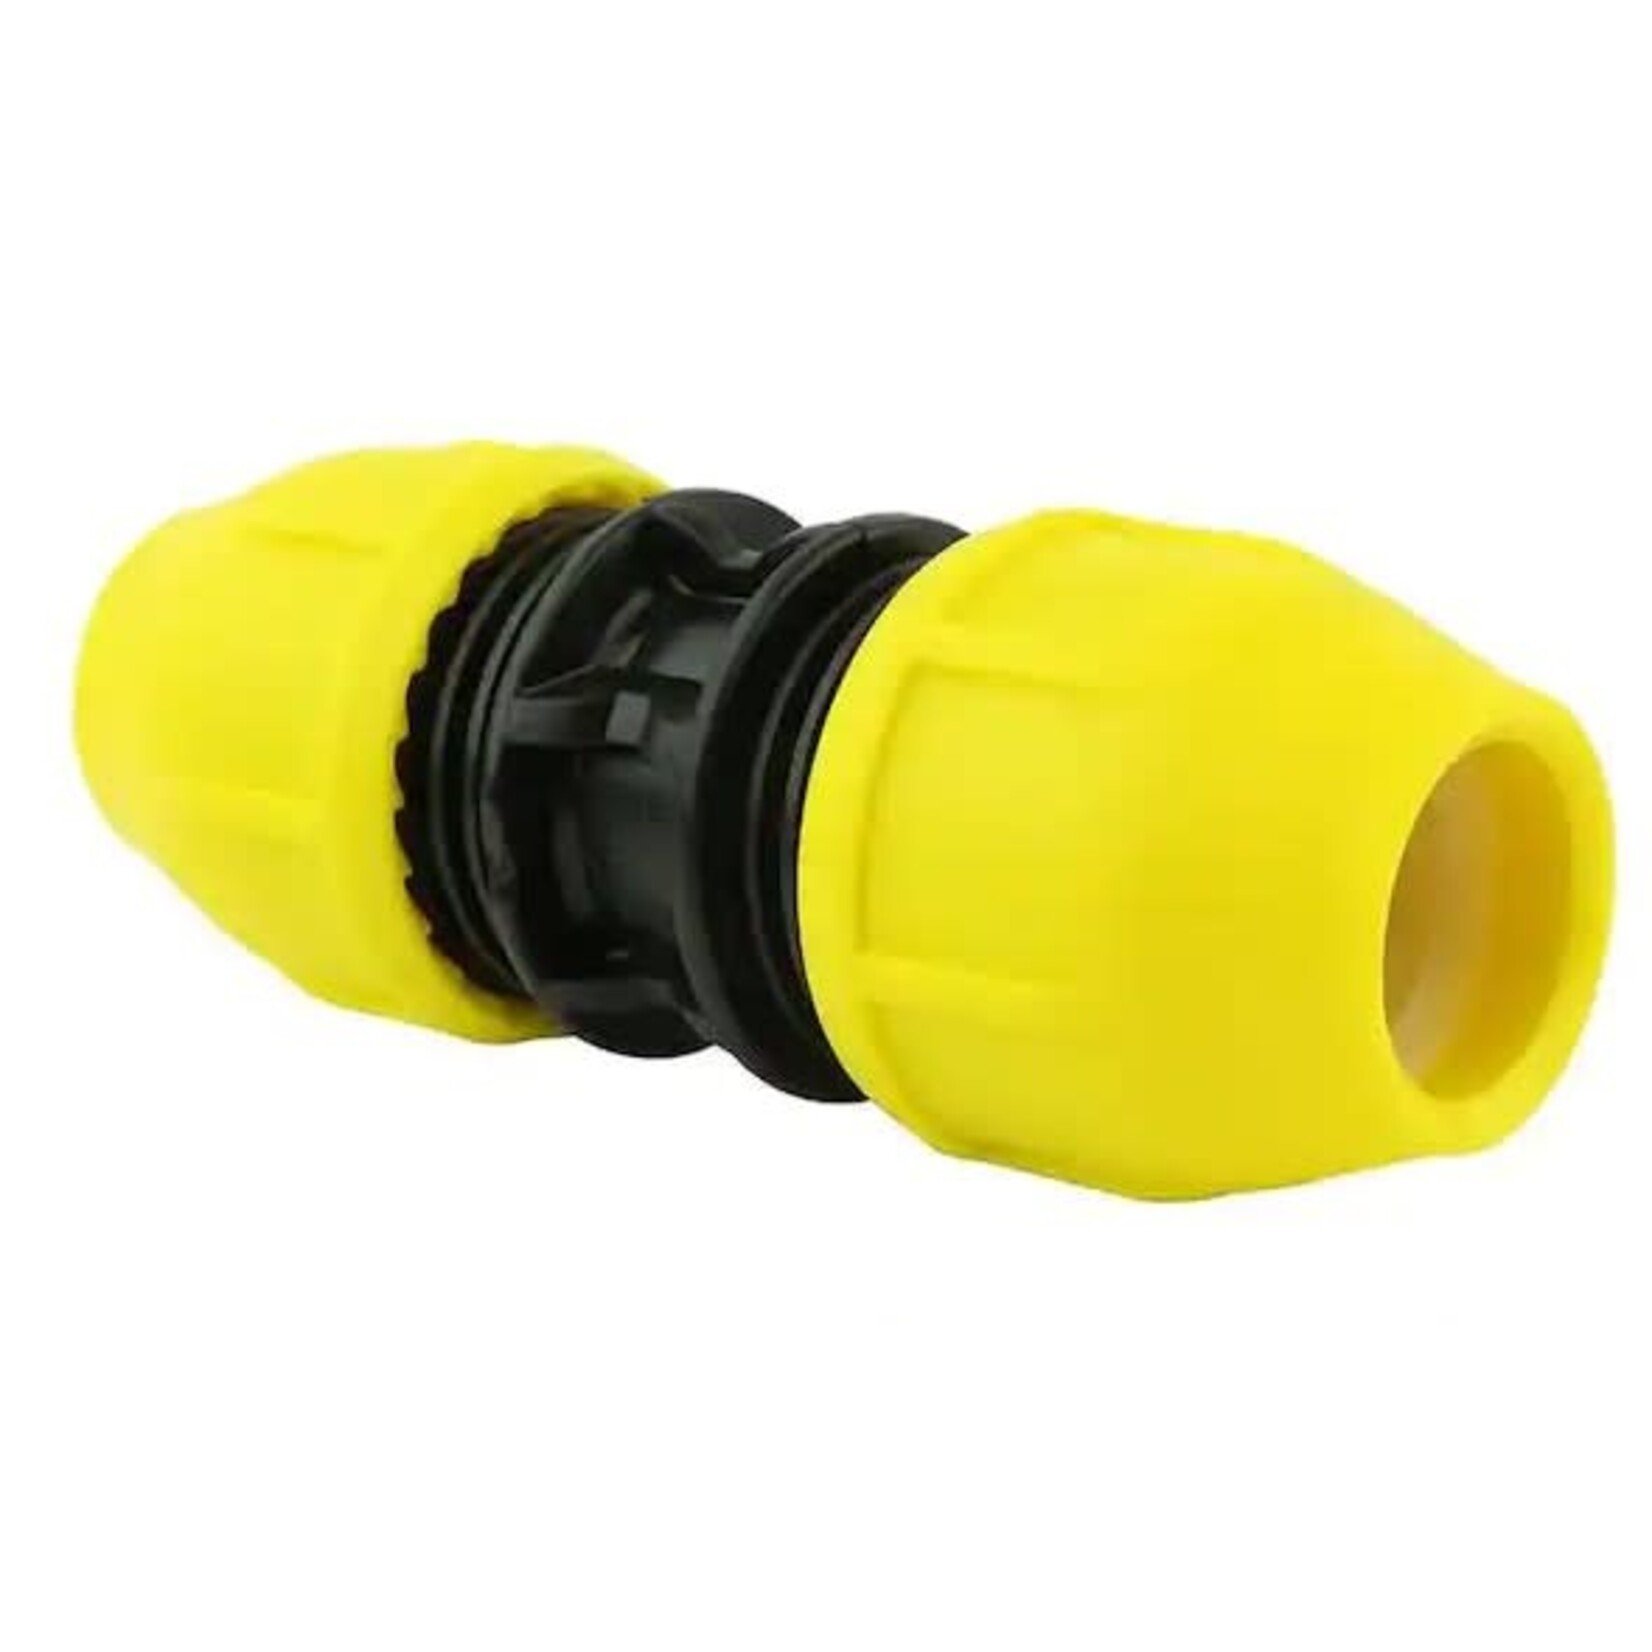 HOME-FLEX 1 1/2 IN YELLOW GAS LINE COMPRESSION COUPLING